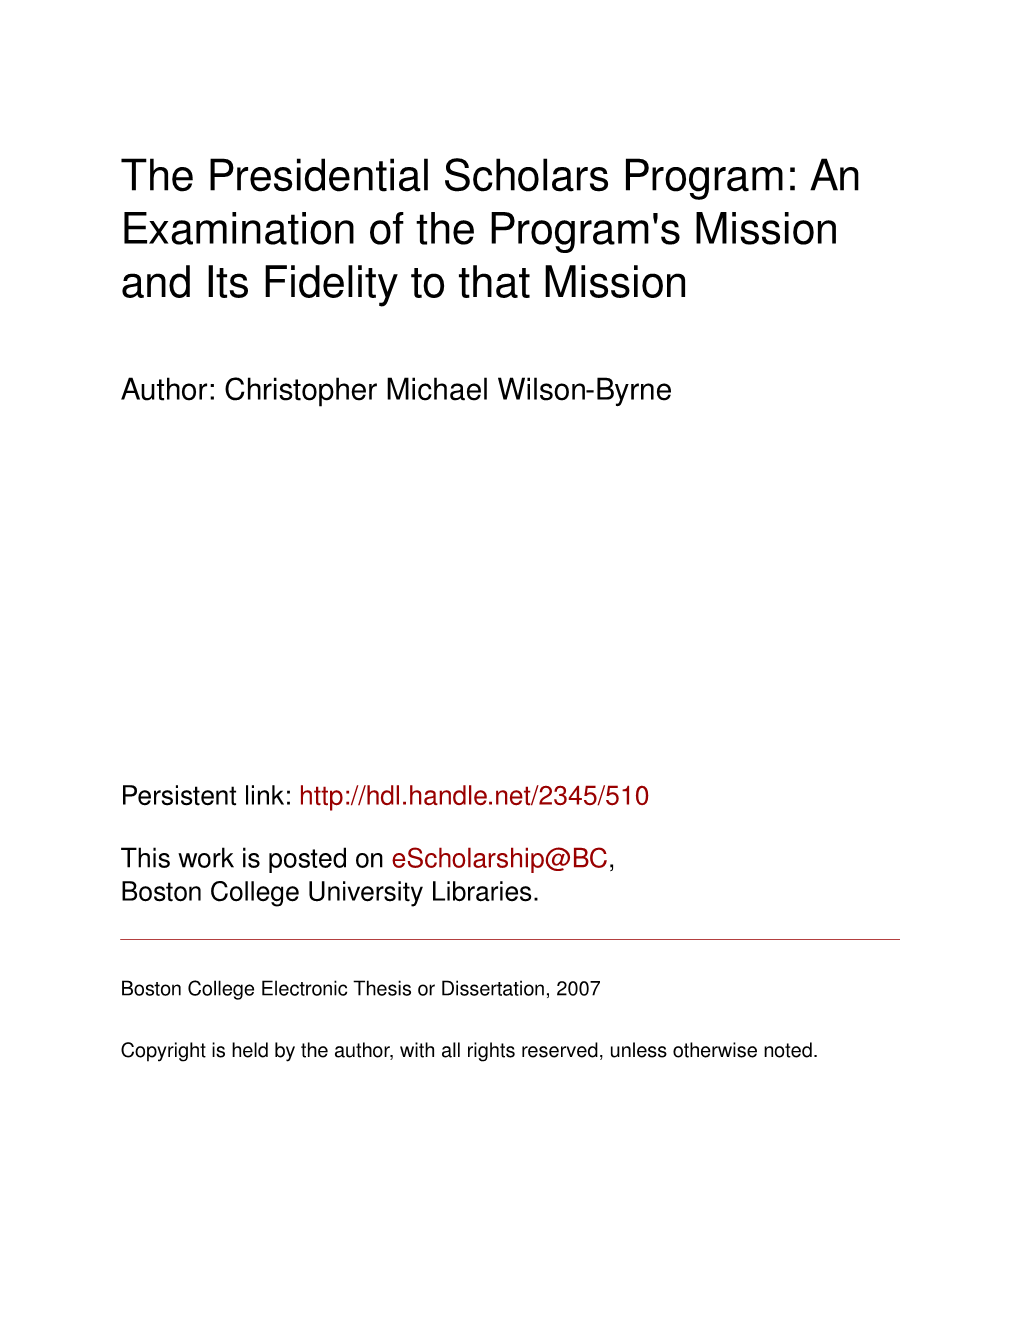 The Presidential Scholars Program: an Examination of the Program's Mission and Its Fidelity to That Mission